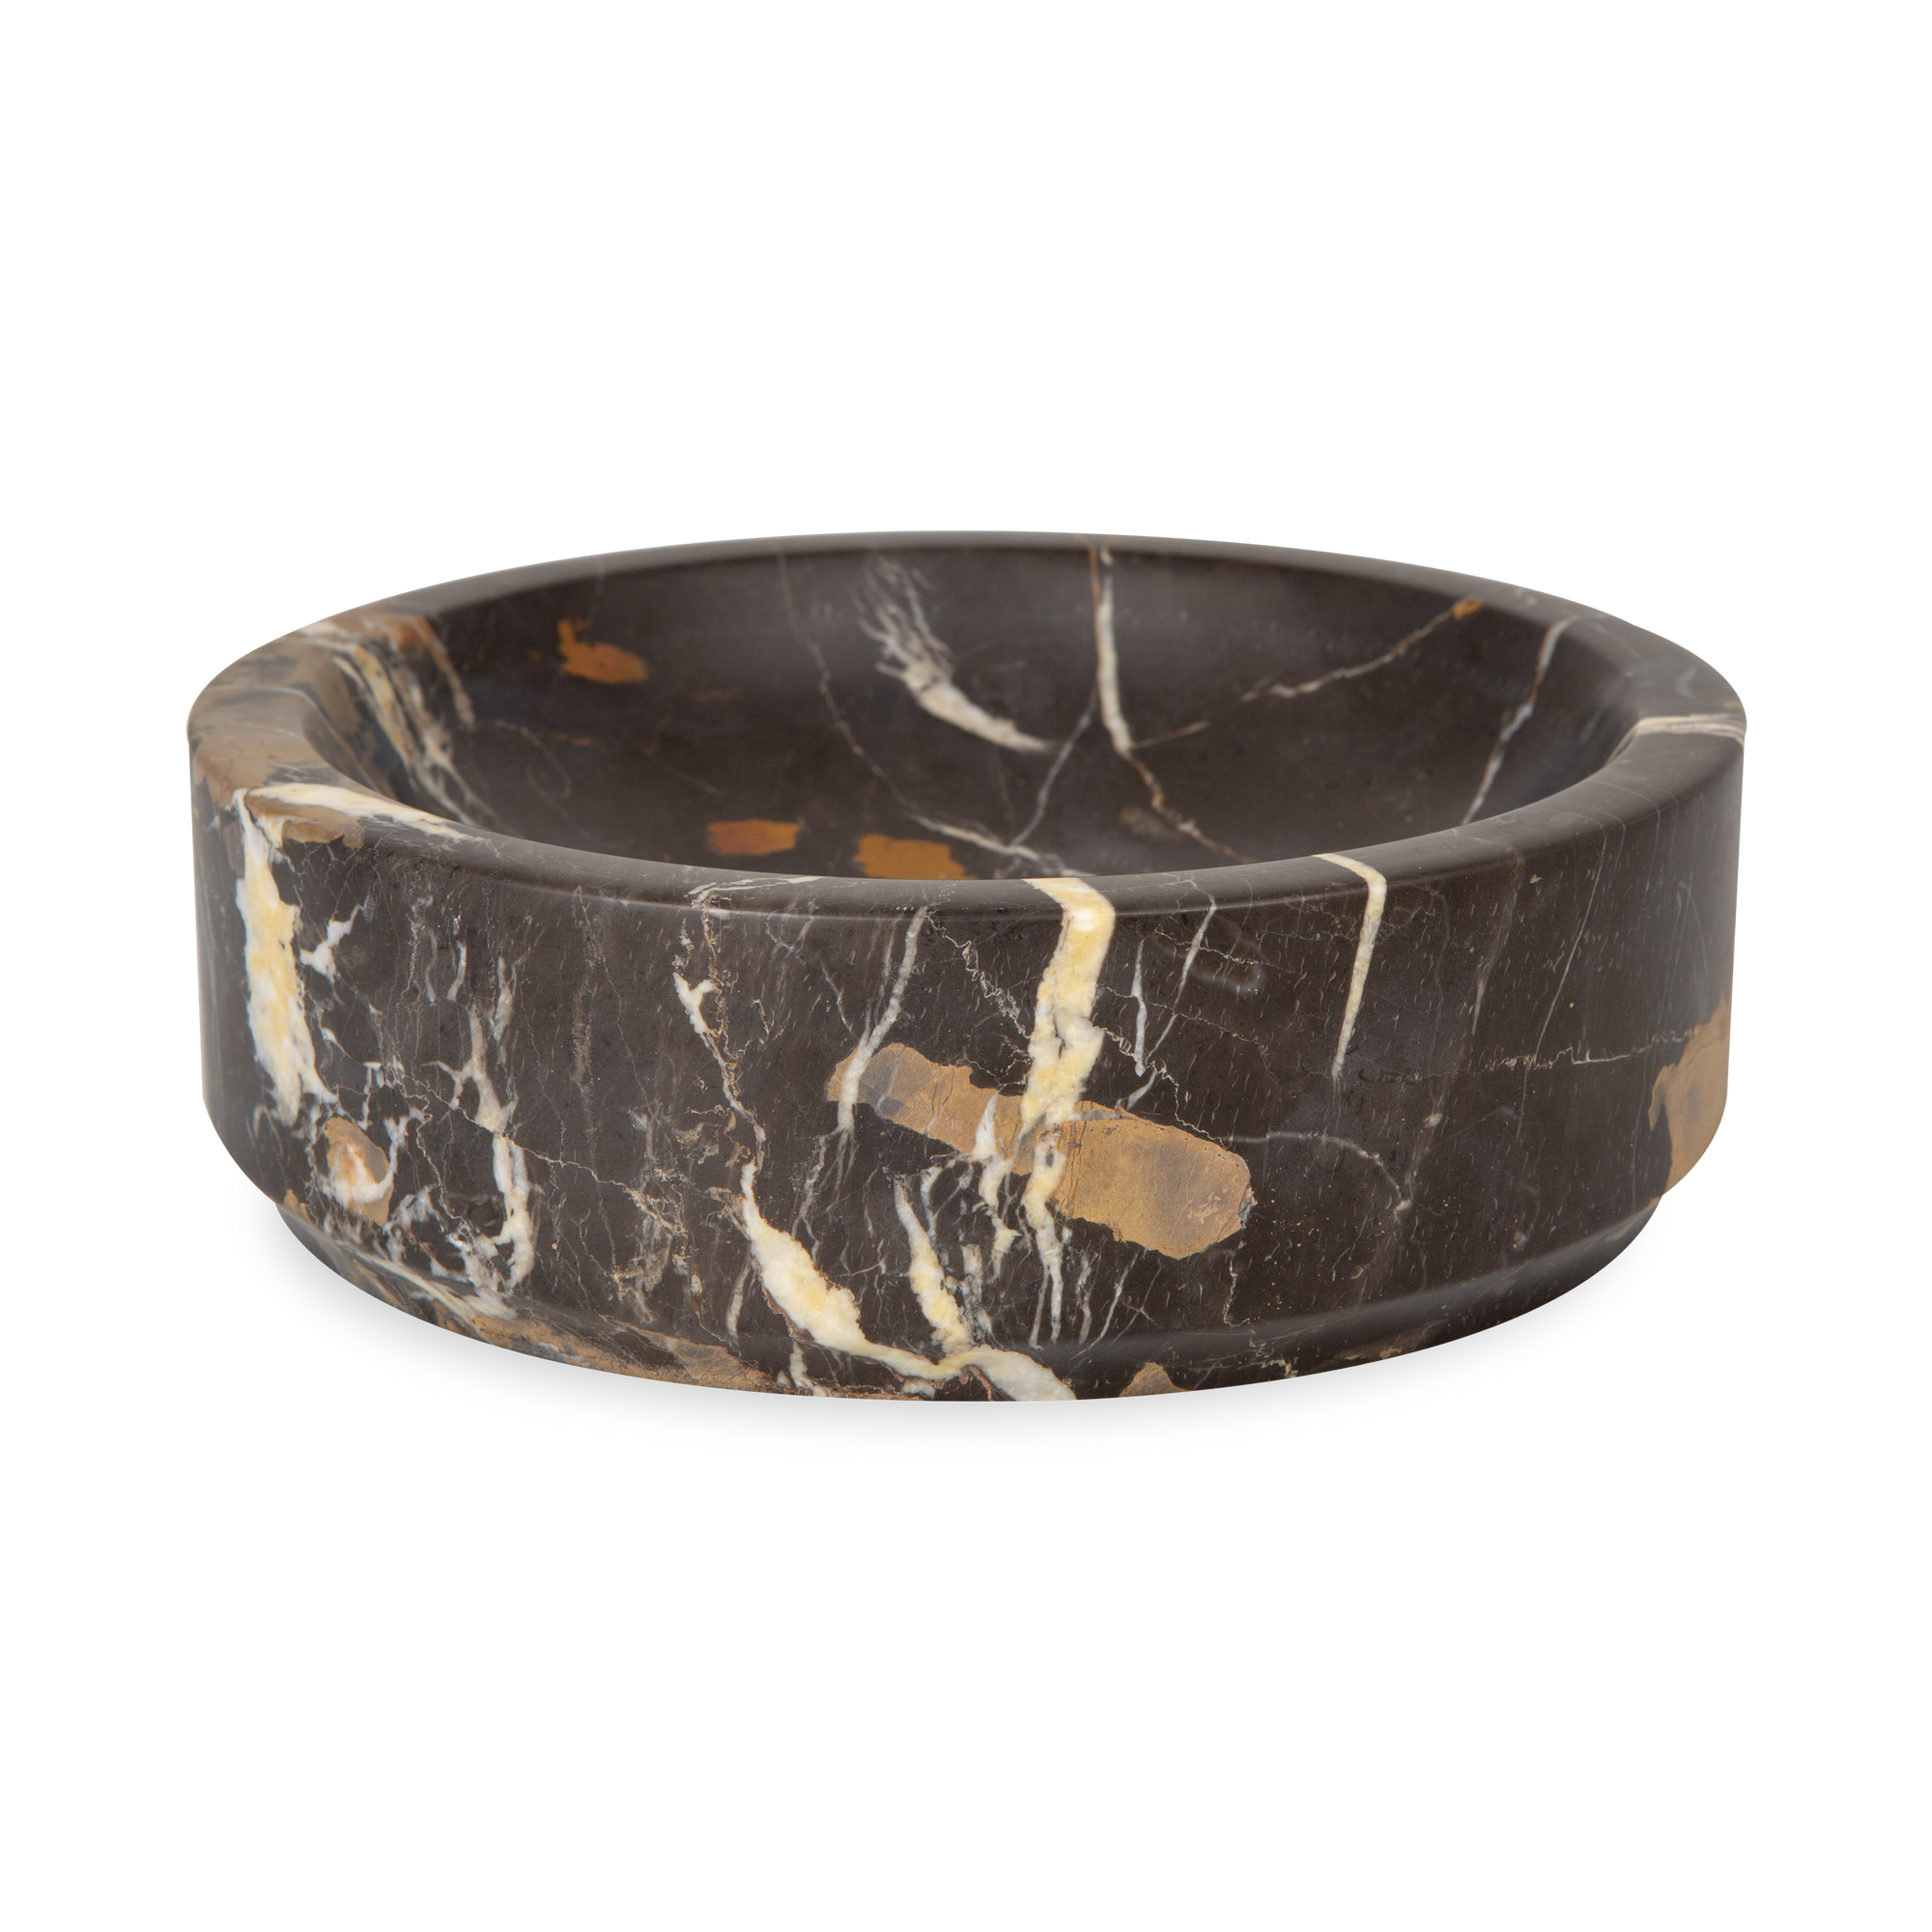 Provides elements of elegance and sophistication, the Honed Marble Catchall features black and gold tones that strikes a moody yet dramatic statement.